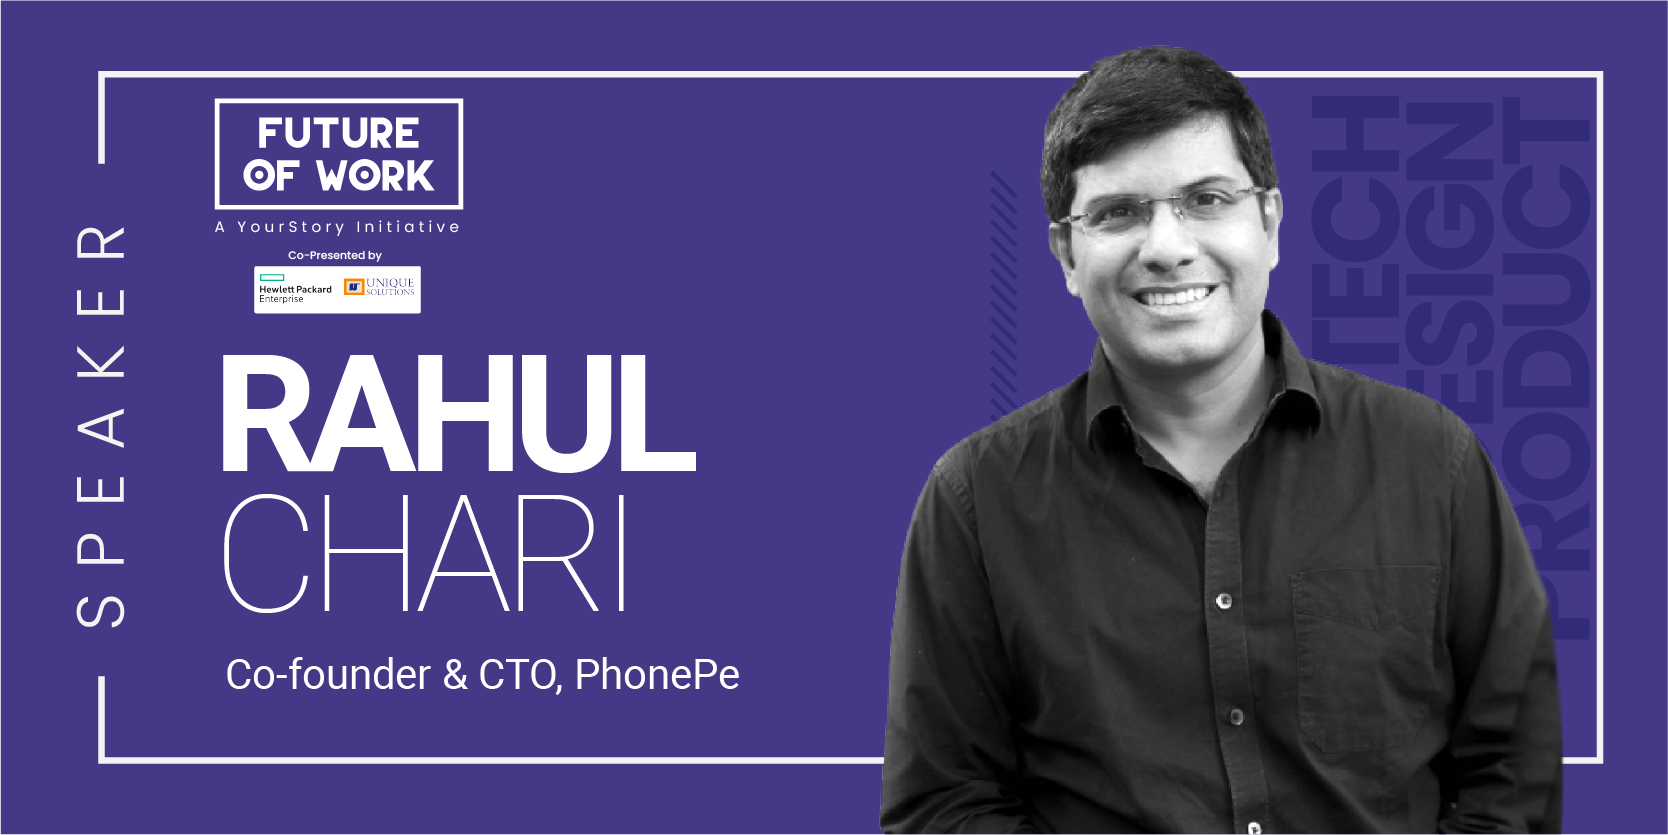 Future of Work: Pandemic lessons, govt intervention, and advice for young founders - everything PhonePe's Rahul Chari spoke about